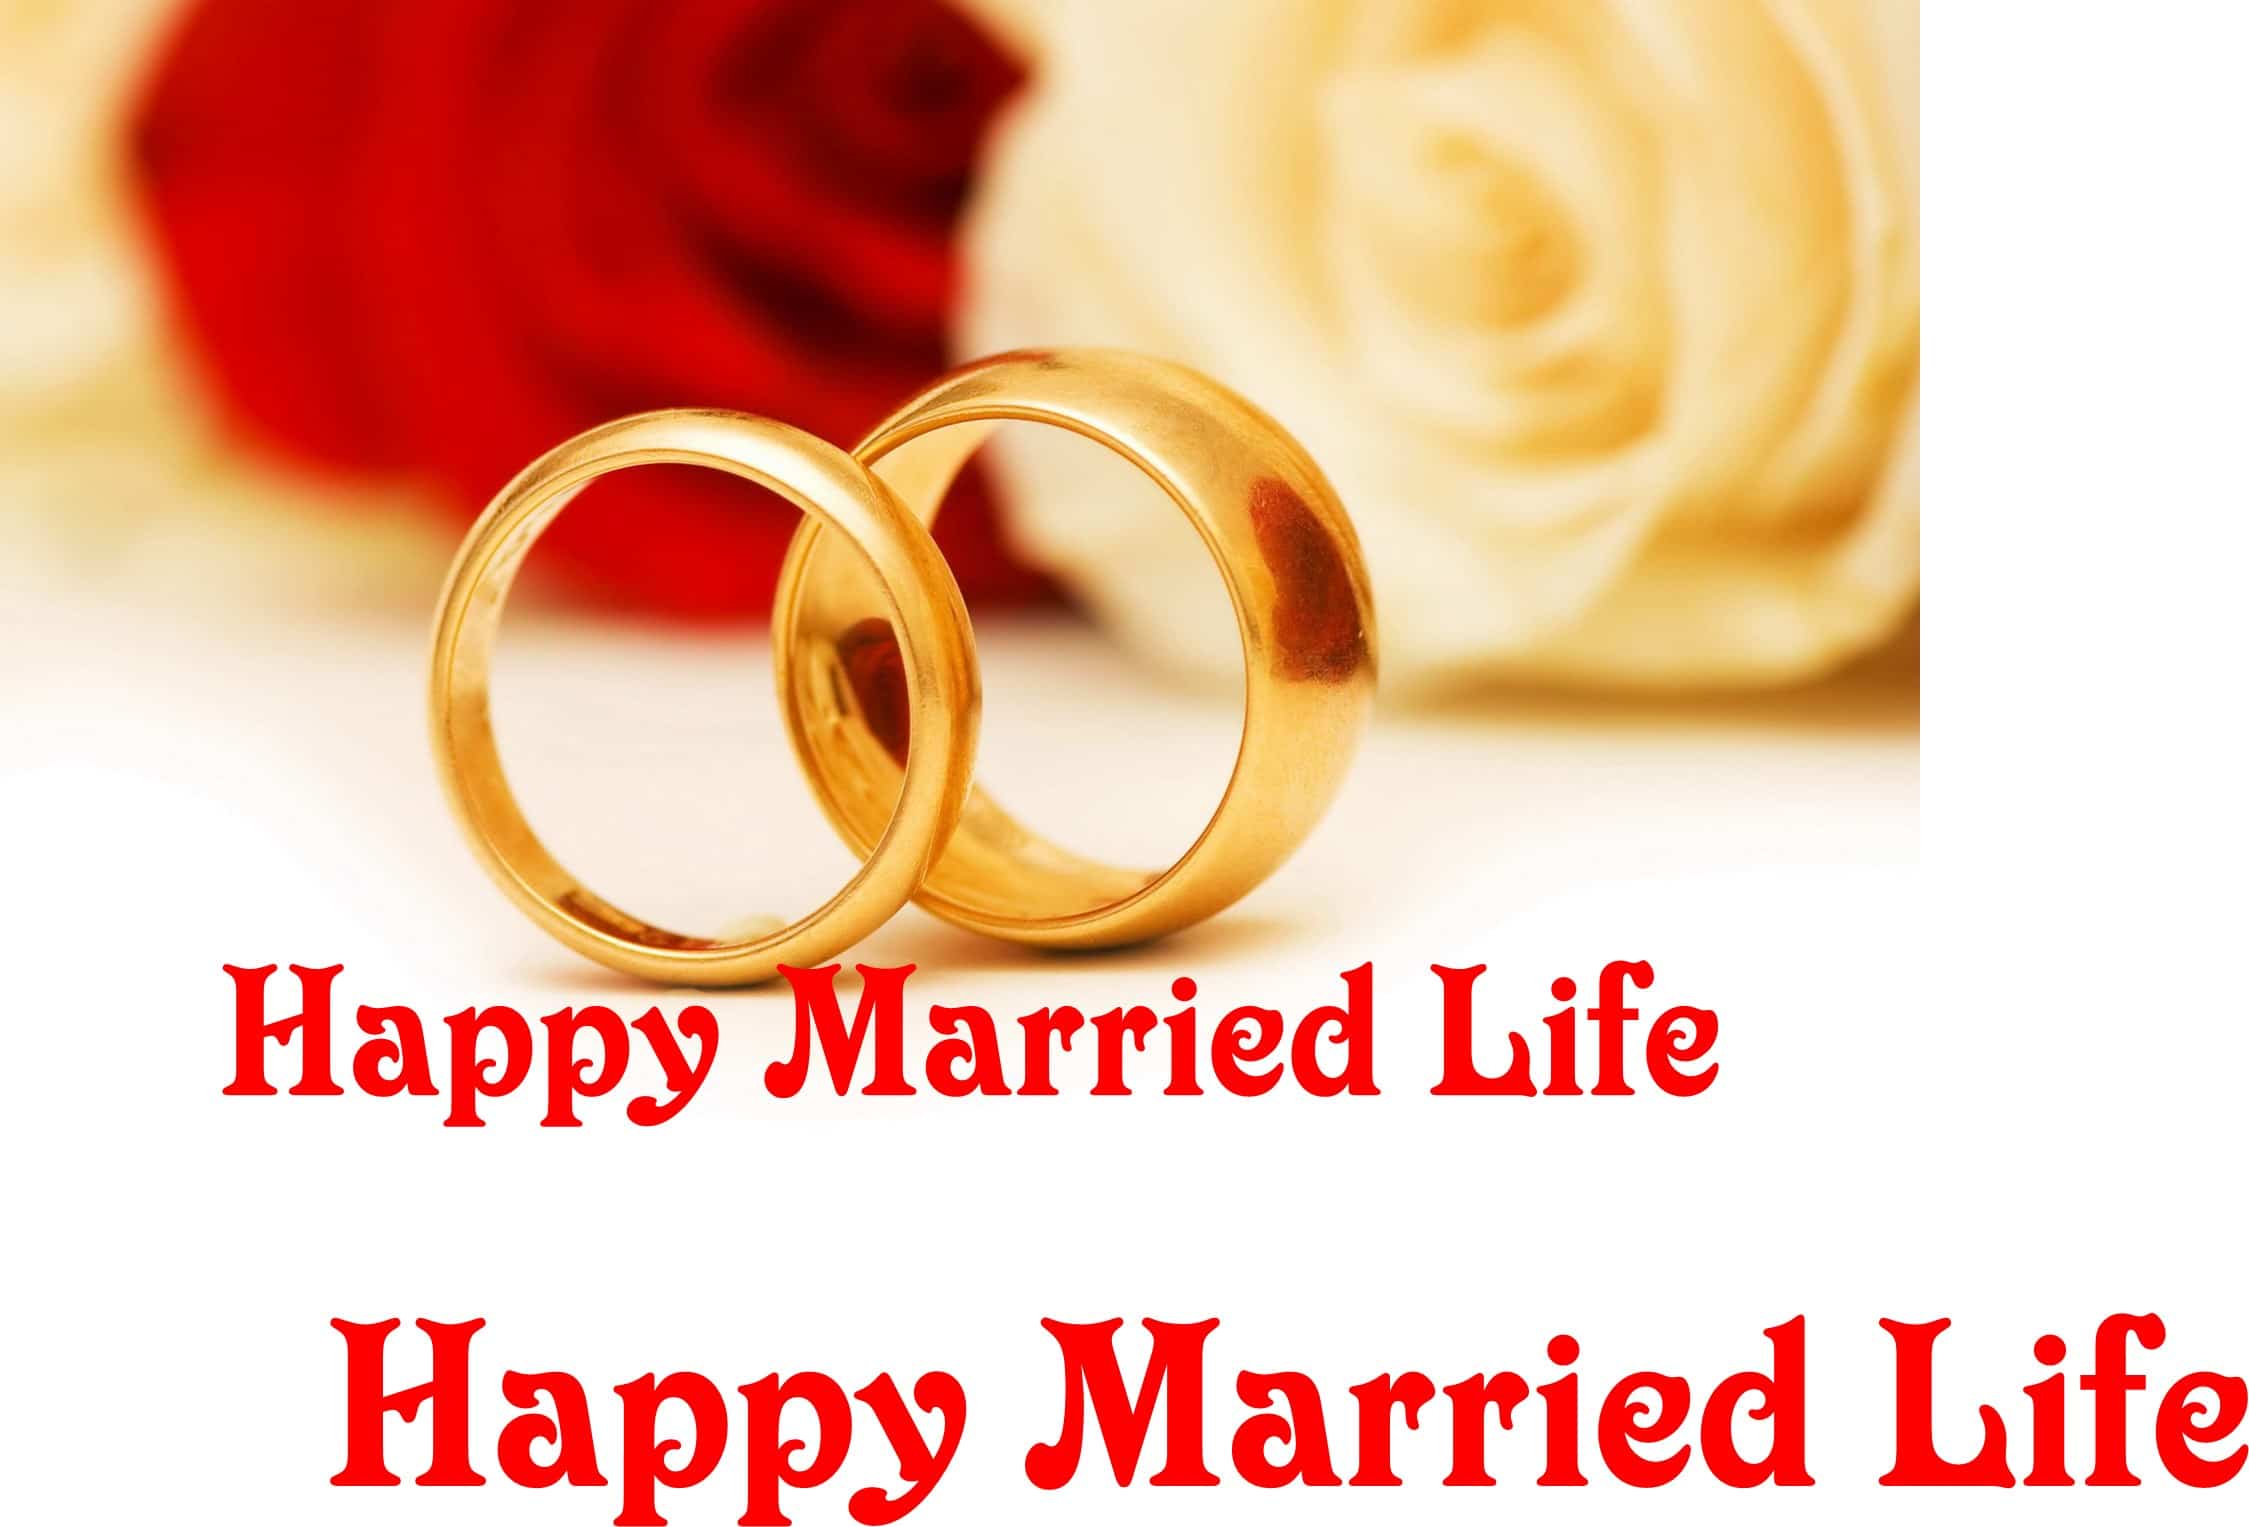 Happy Marriage Life Name - 2249x1527 Wallpaper 